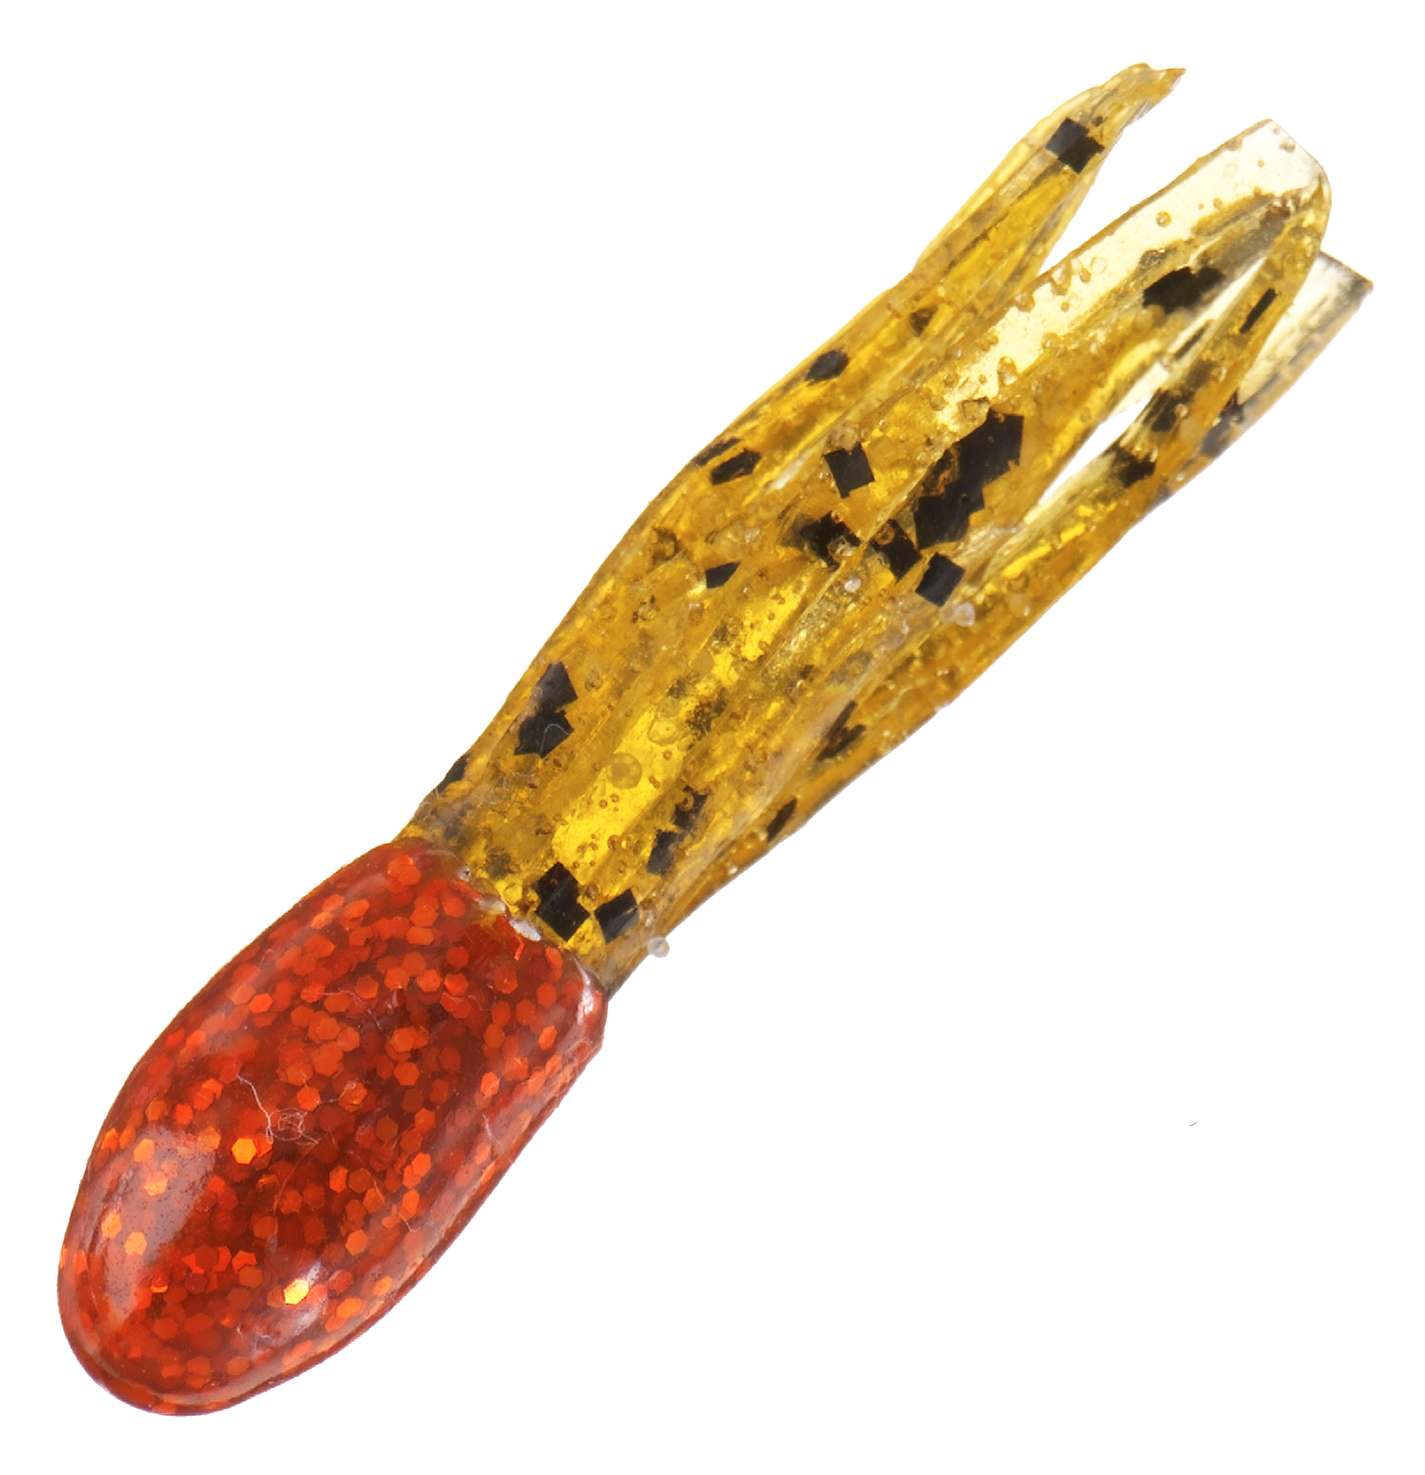 Bass Pro Shops Sparkle Squirts - 1-1/2"" - 15 pack - Electric Orange/Rootbeer